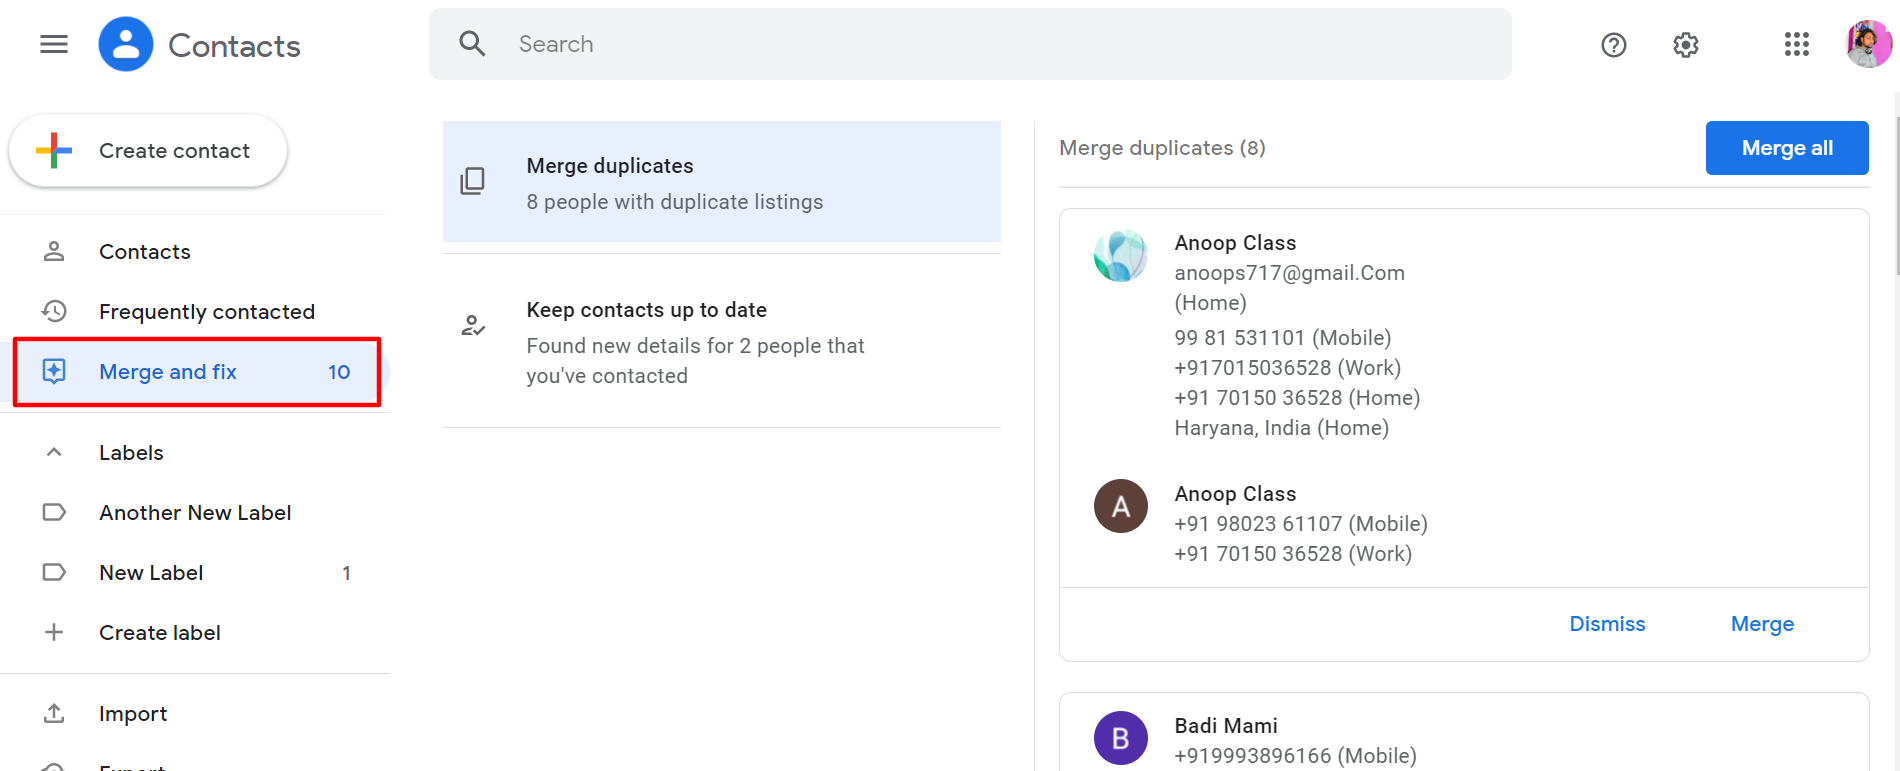 Google Contacts Merge and Fix